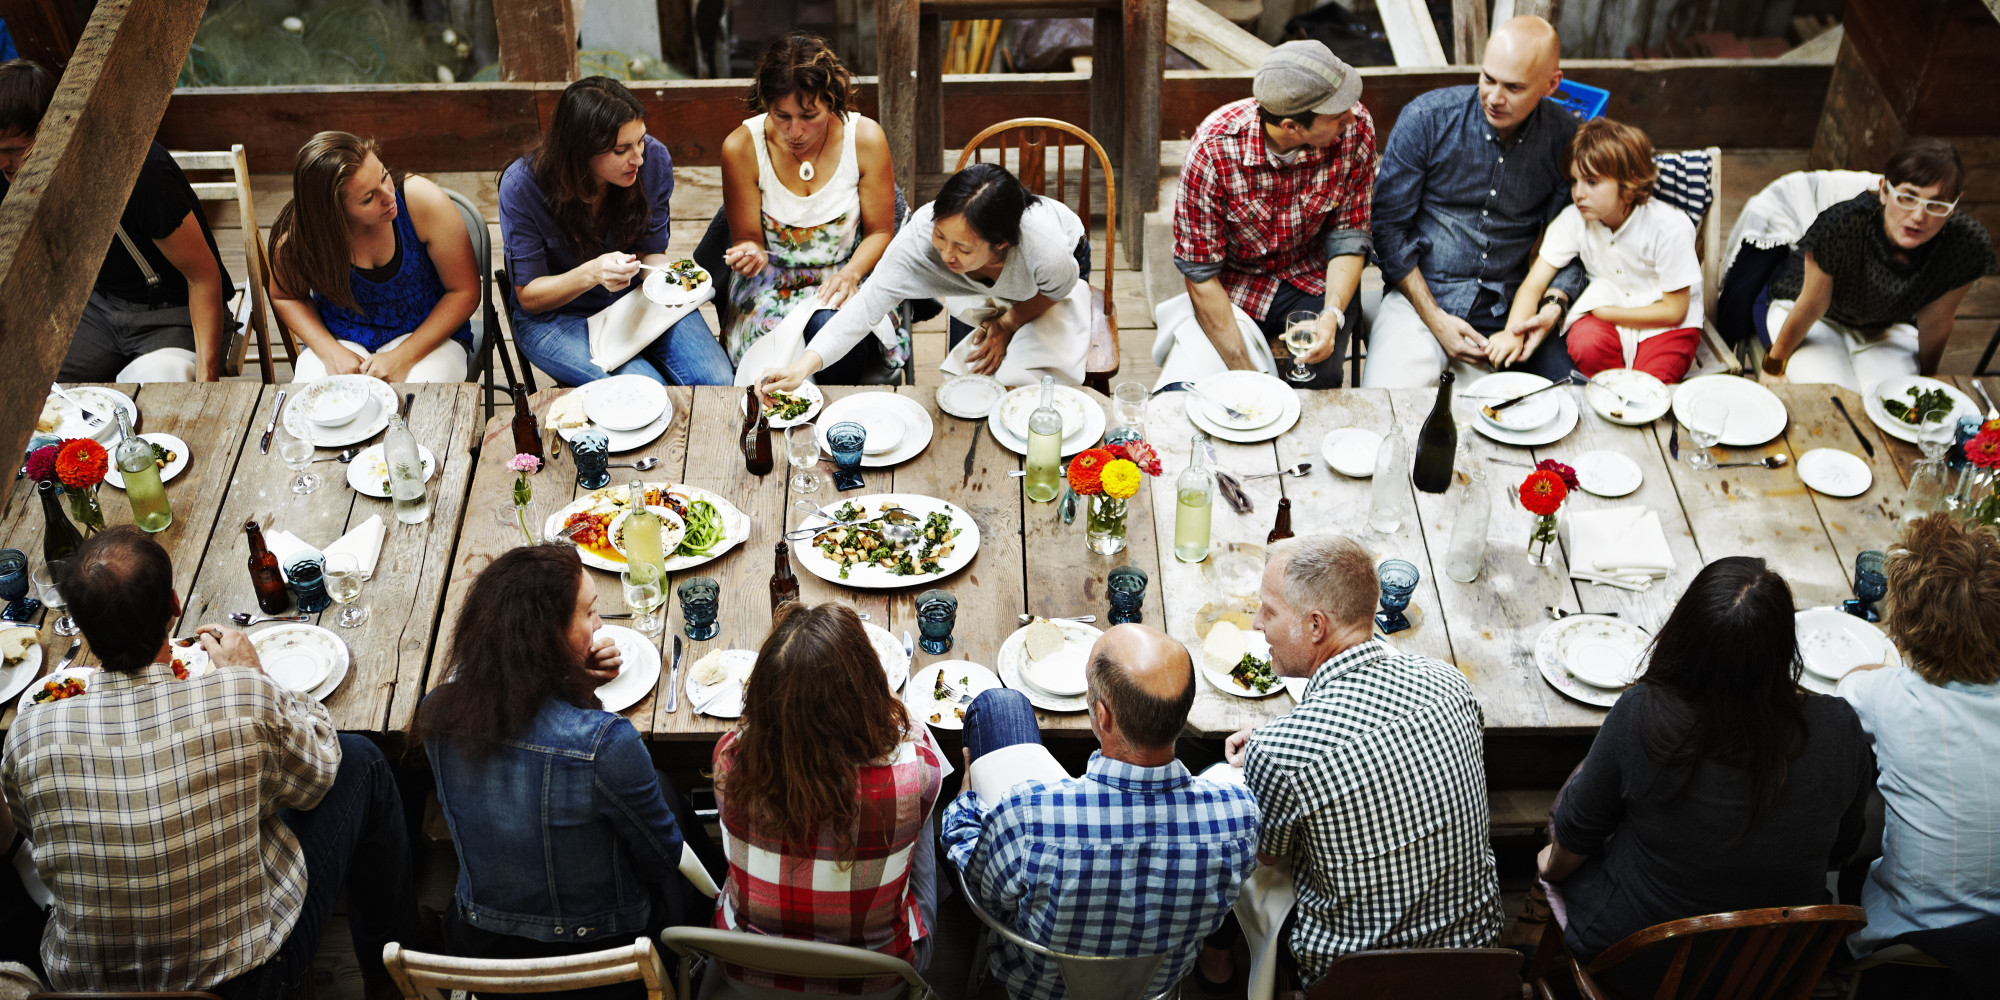 9 People Who Will Throw A Wrench In Your Dinner Party | HuffPost